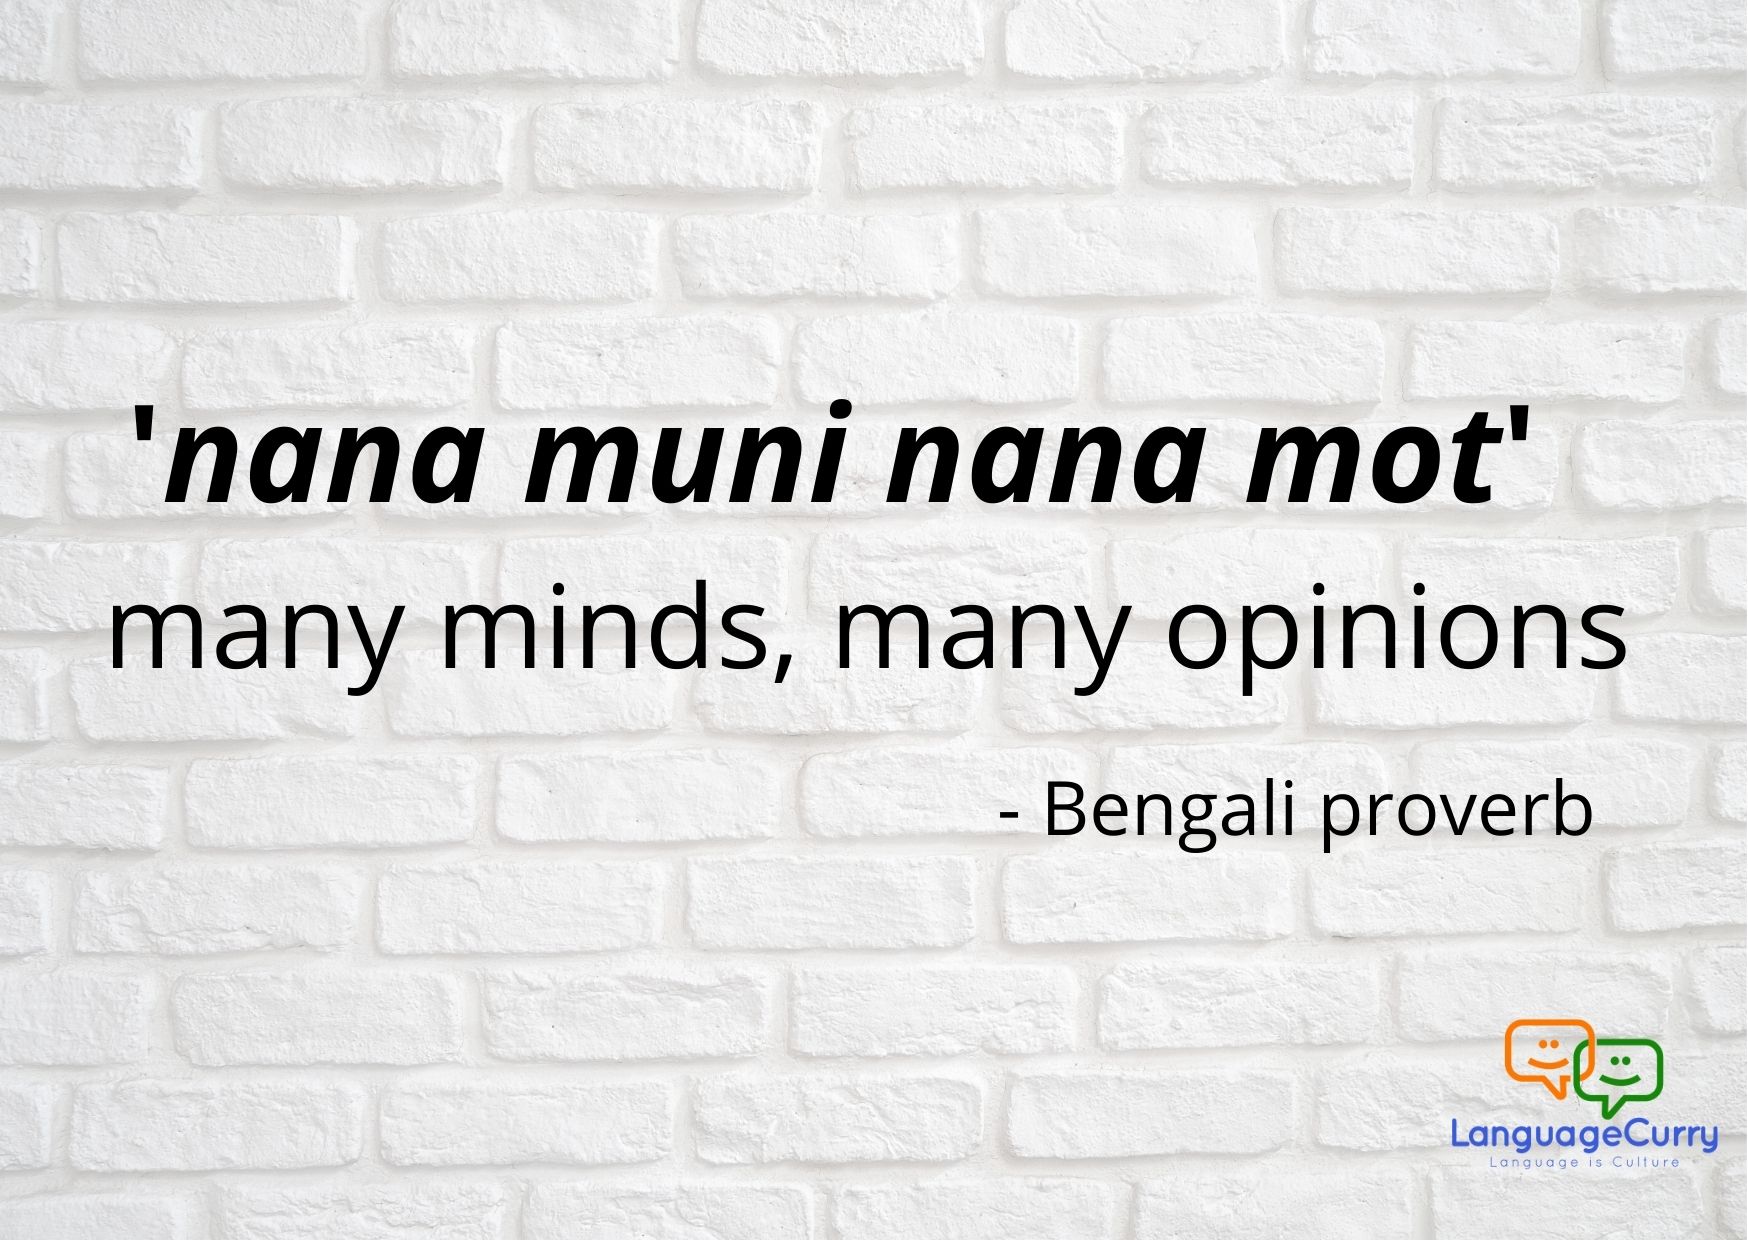 Proverbs in Bengali